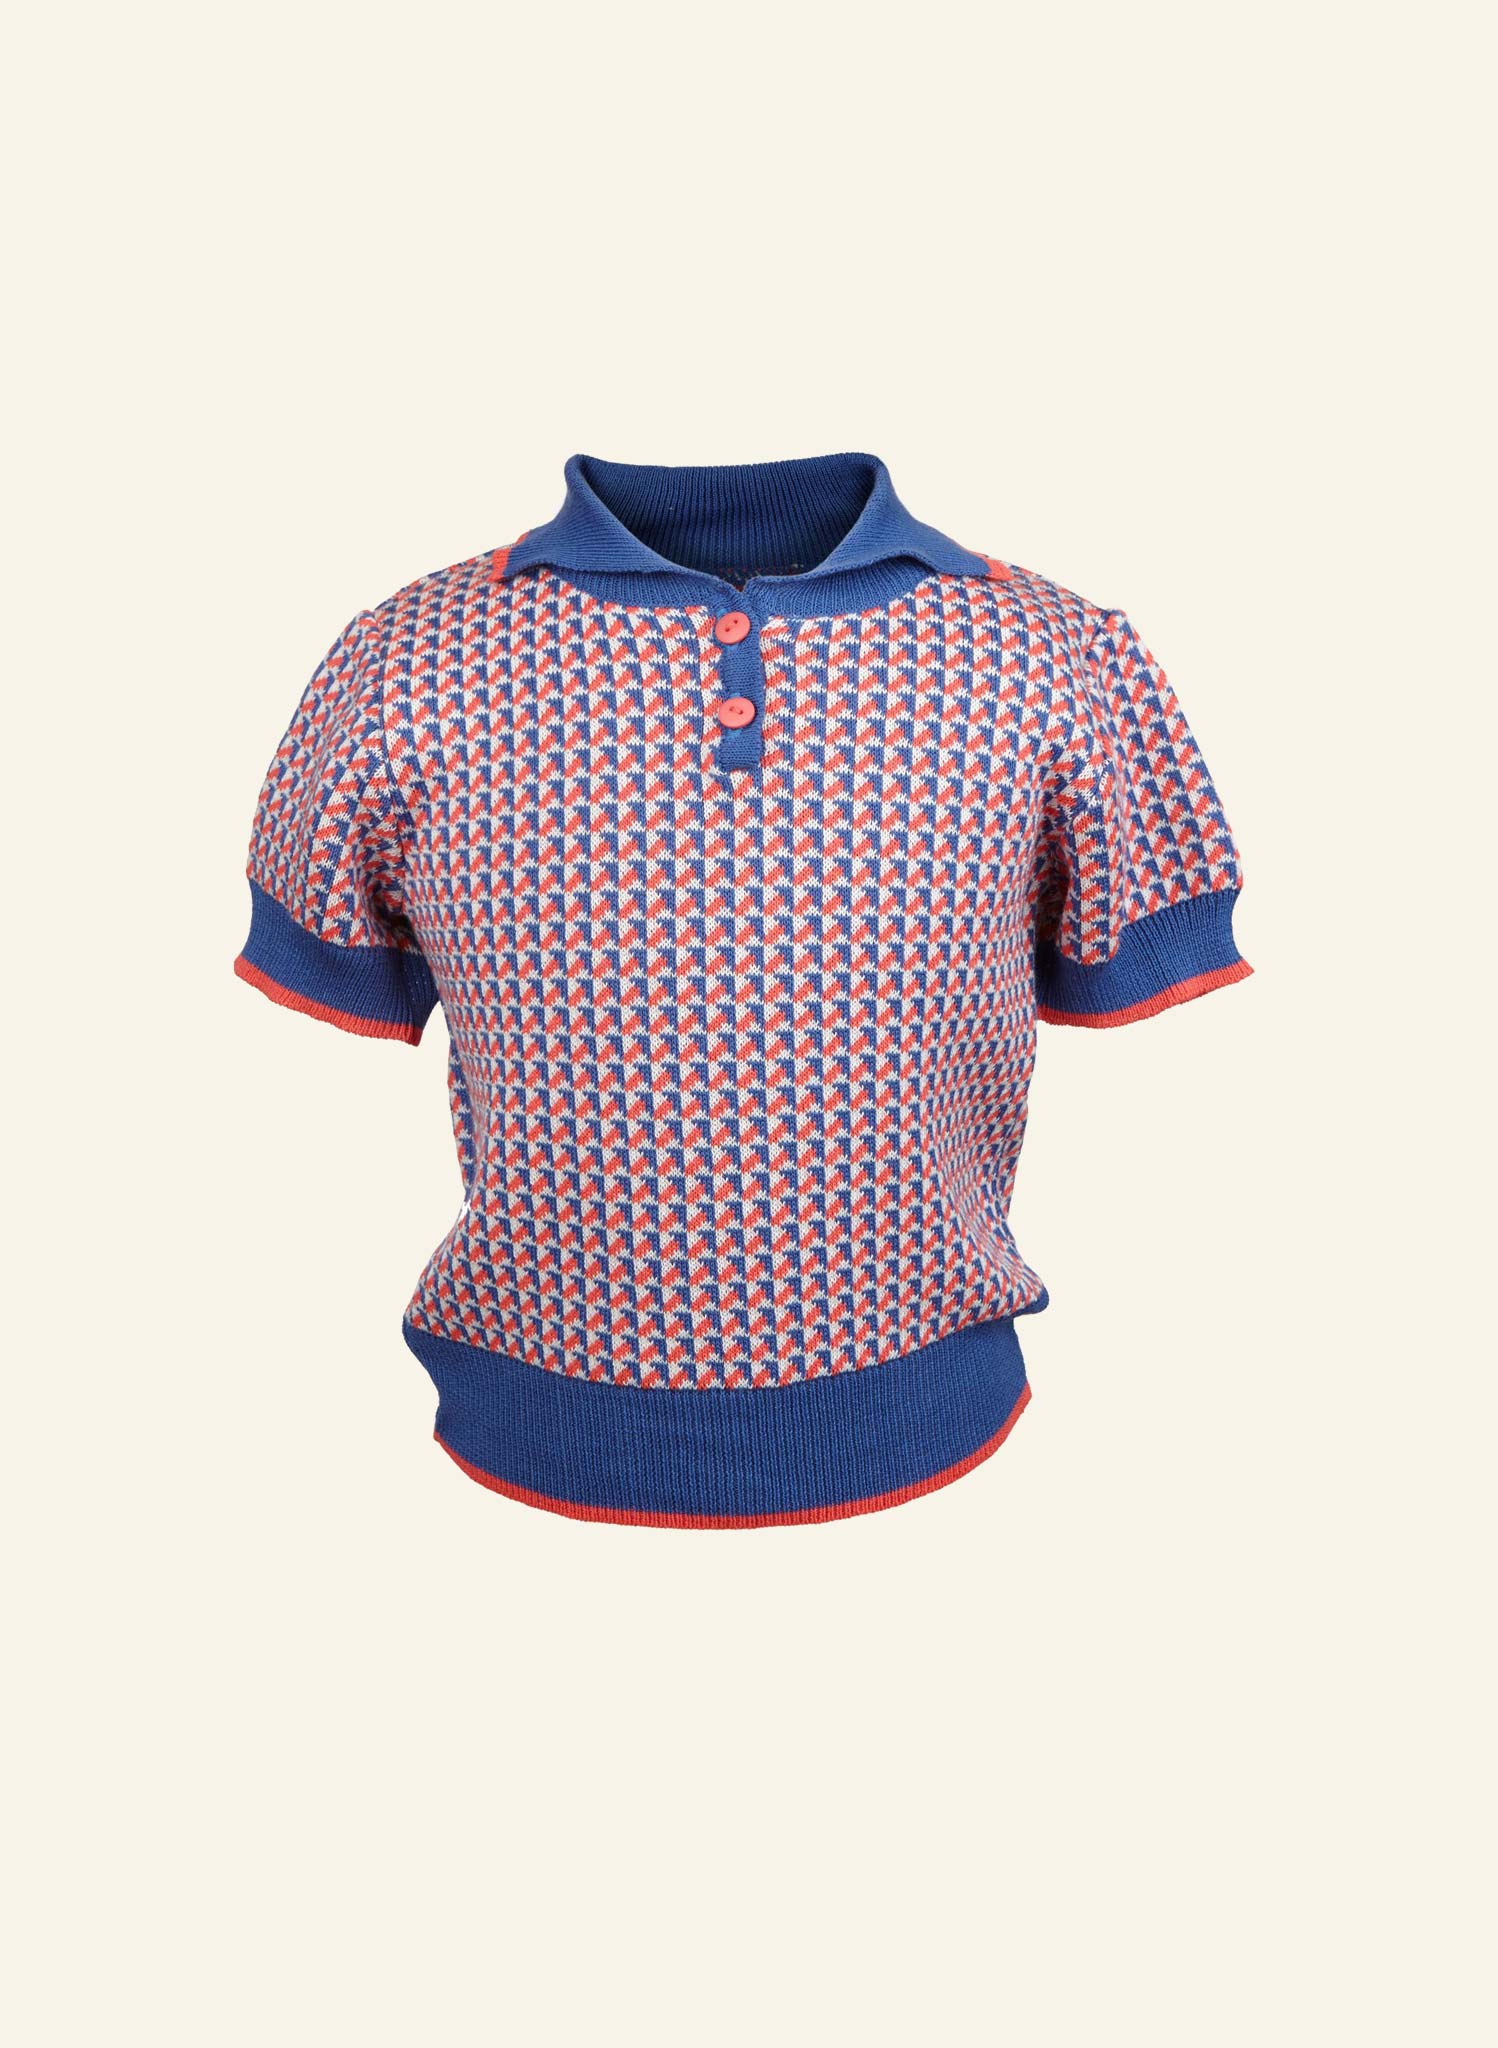 Children's Top - Blue/Coral Fly Away